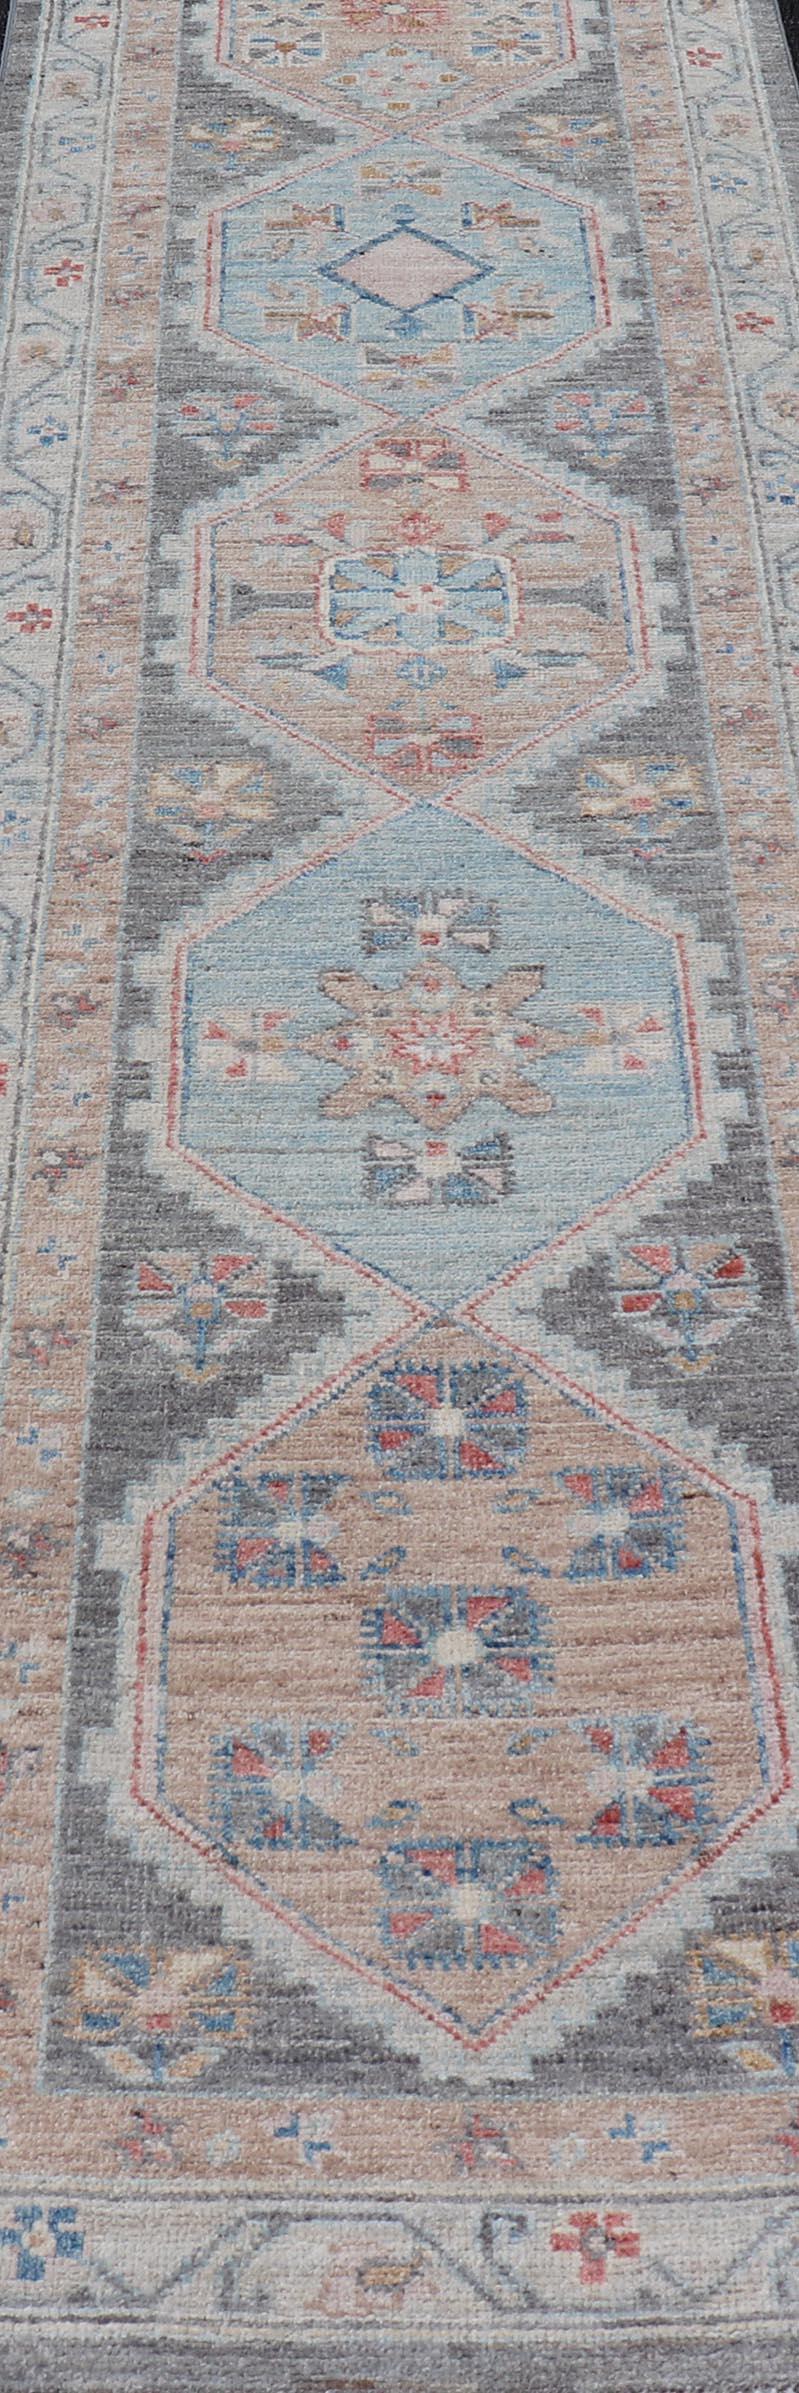 This Hand-Knotted Oushak presents a floral border on top of a dark gray background, accenting colors such as blue, red, and peach. The field displays a creamy orange and a powder blue medallions, showcasing Oushak motifs within. The field also uses